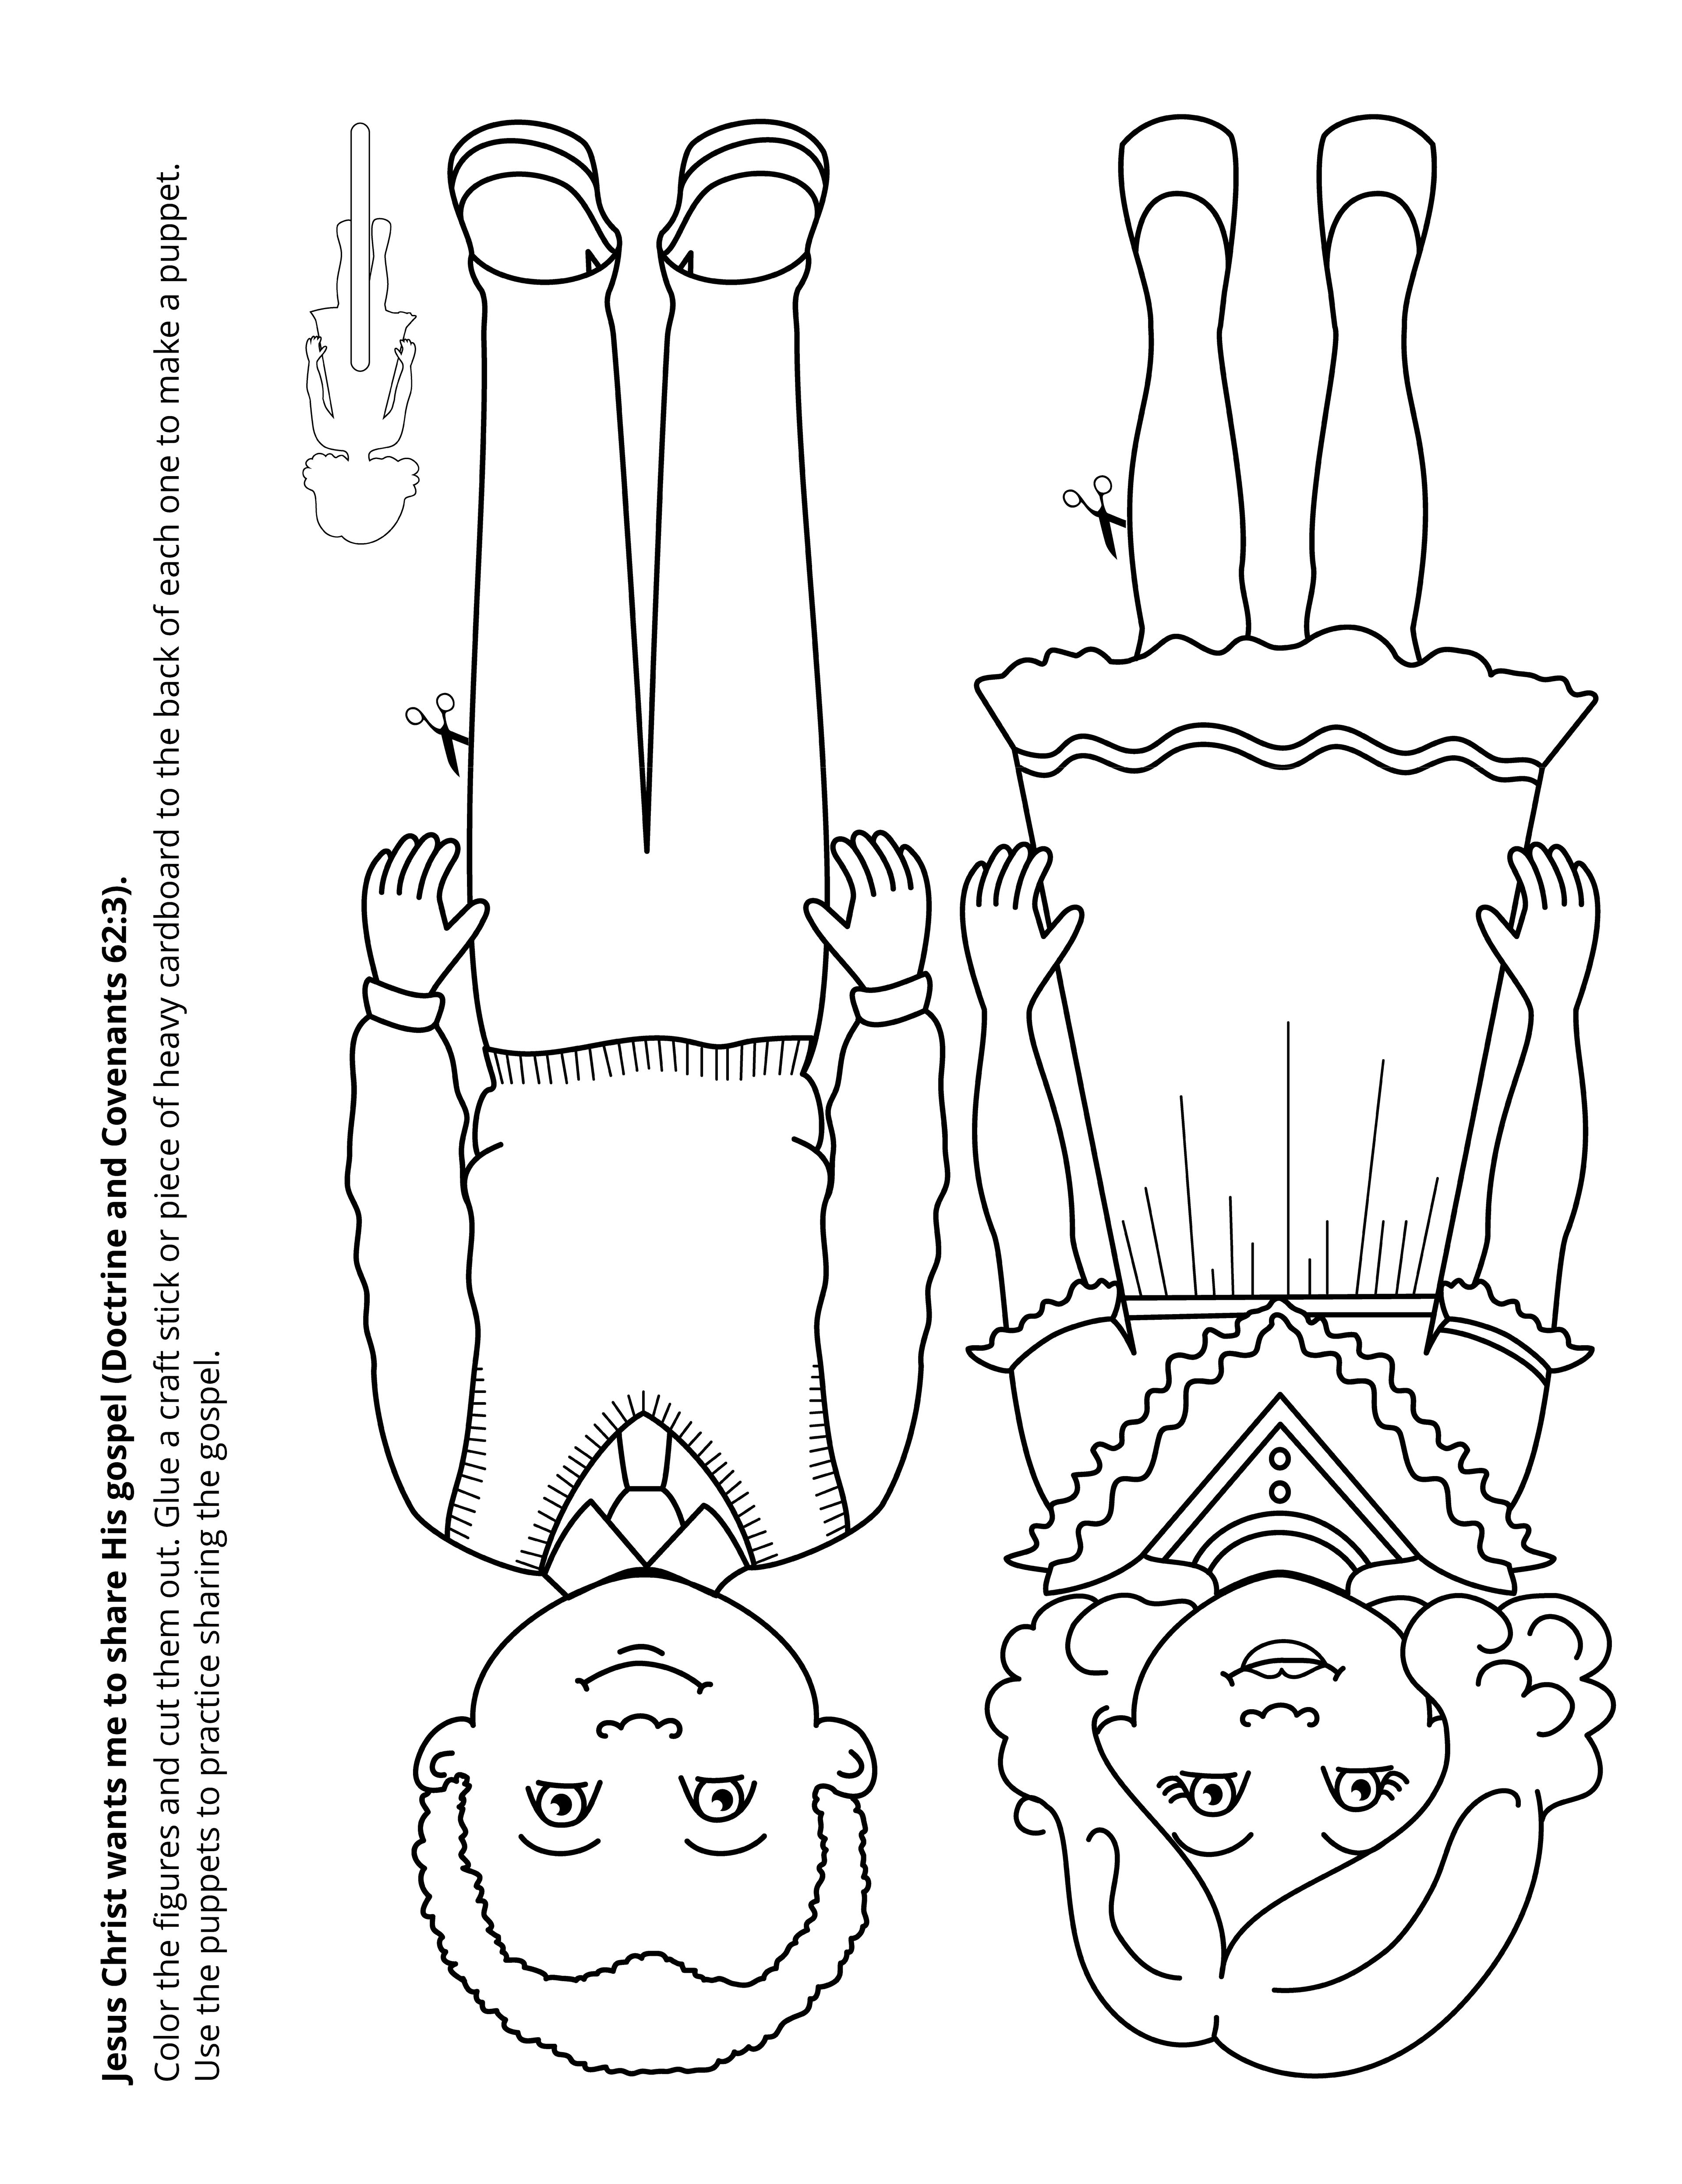 Line art illustration depicts a boy and girl